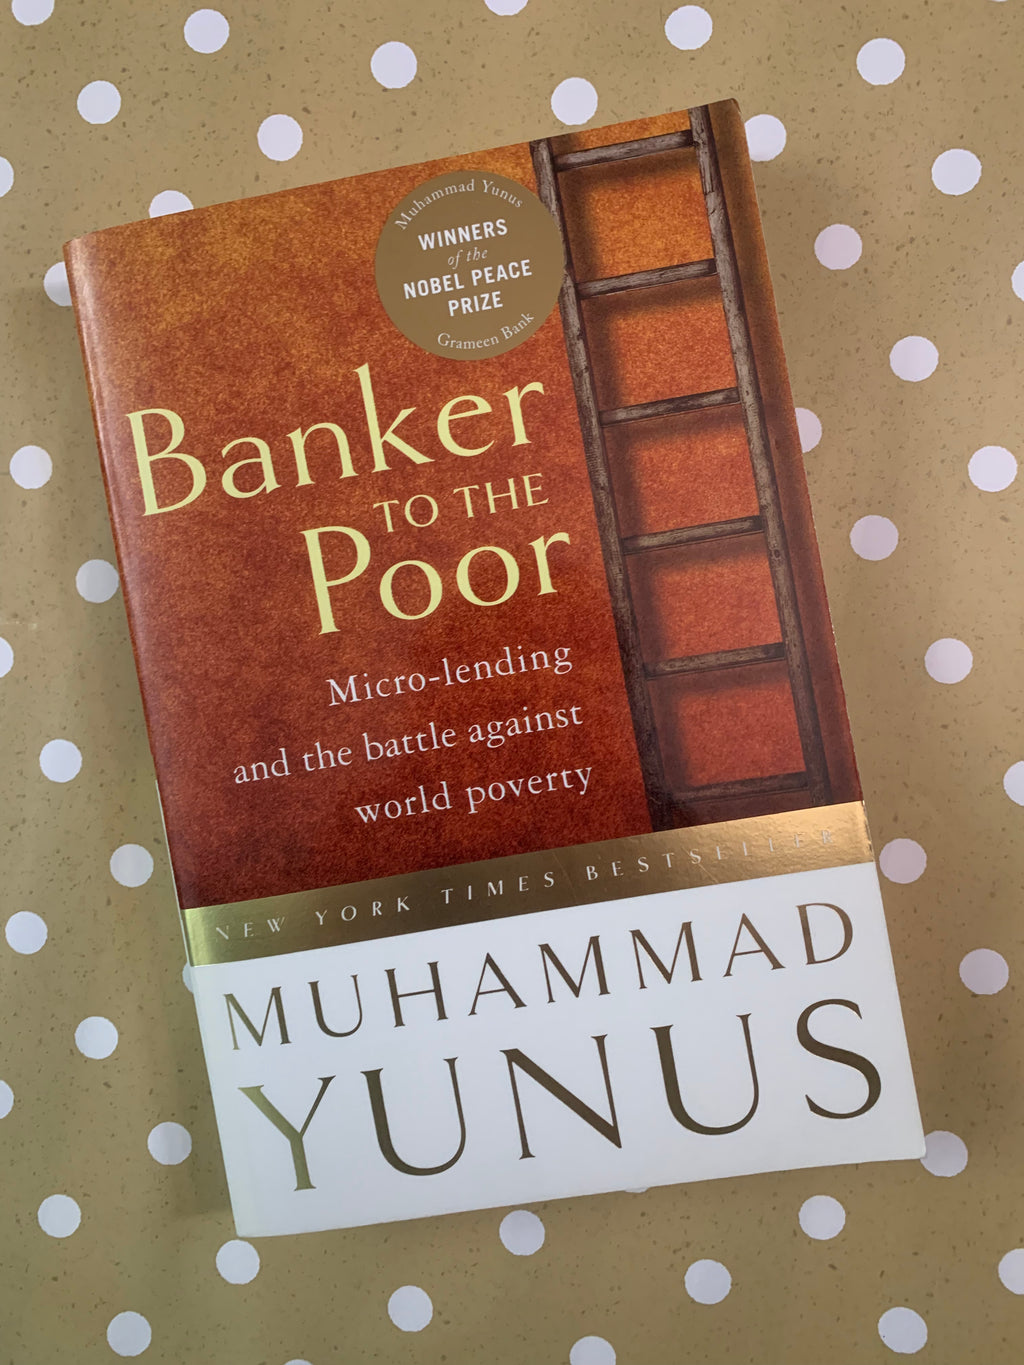 Banker to the Poor: Micro-lending and the battle against world poverty- By Muhammad Yunus